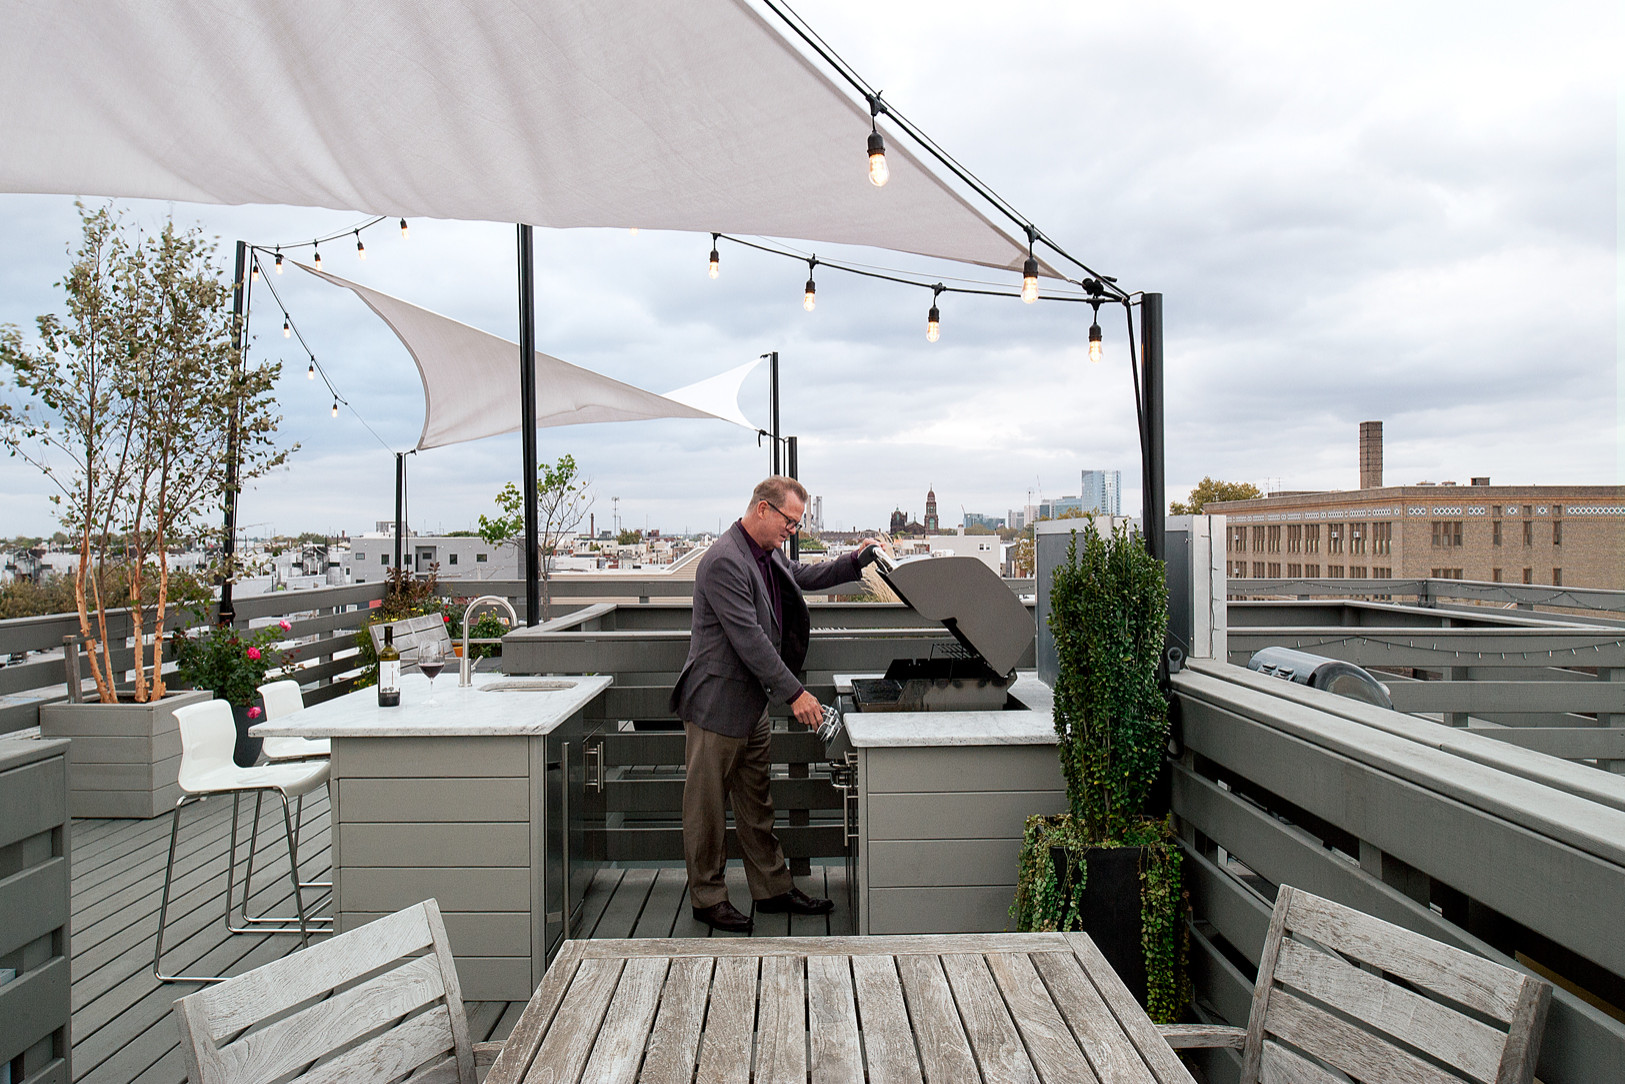 75 Rooftop Deck with an Awning Ideas You'll Love - August, 2023 | Houzz